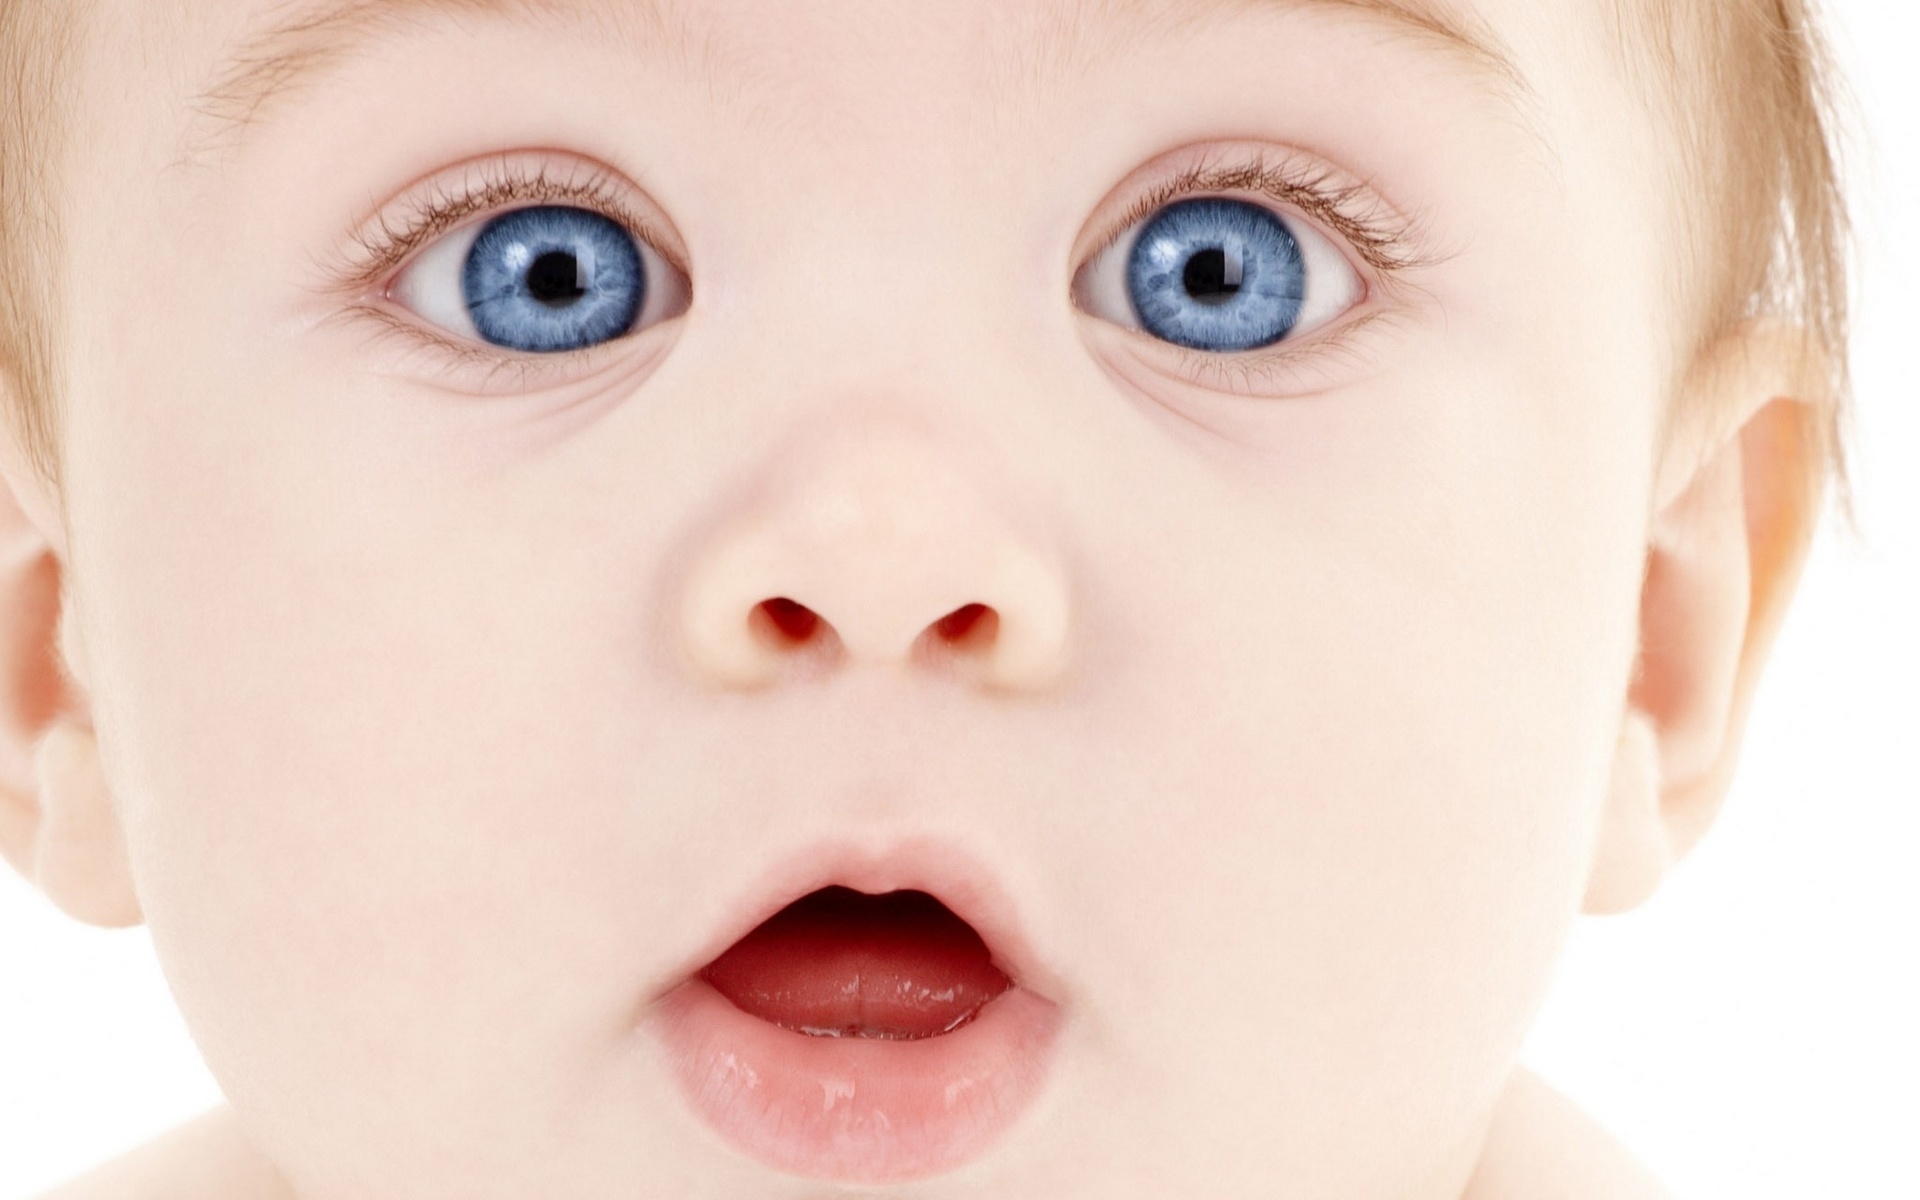 Wallpapers child baby eyes on the desktop